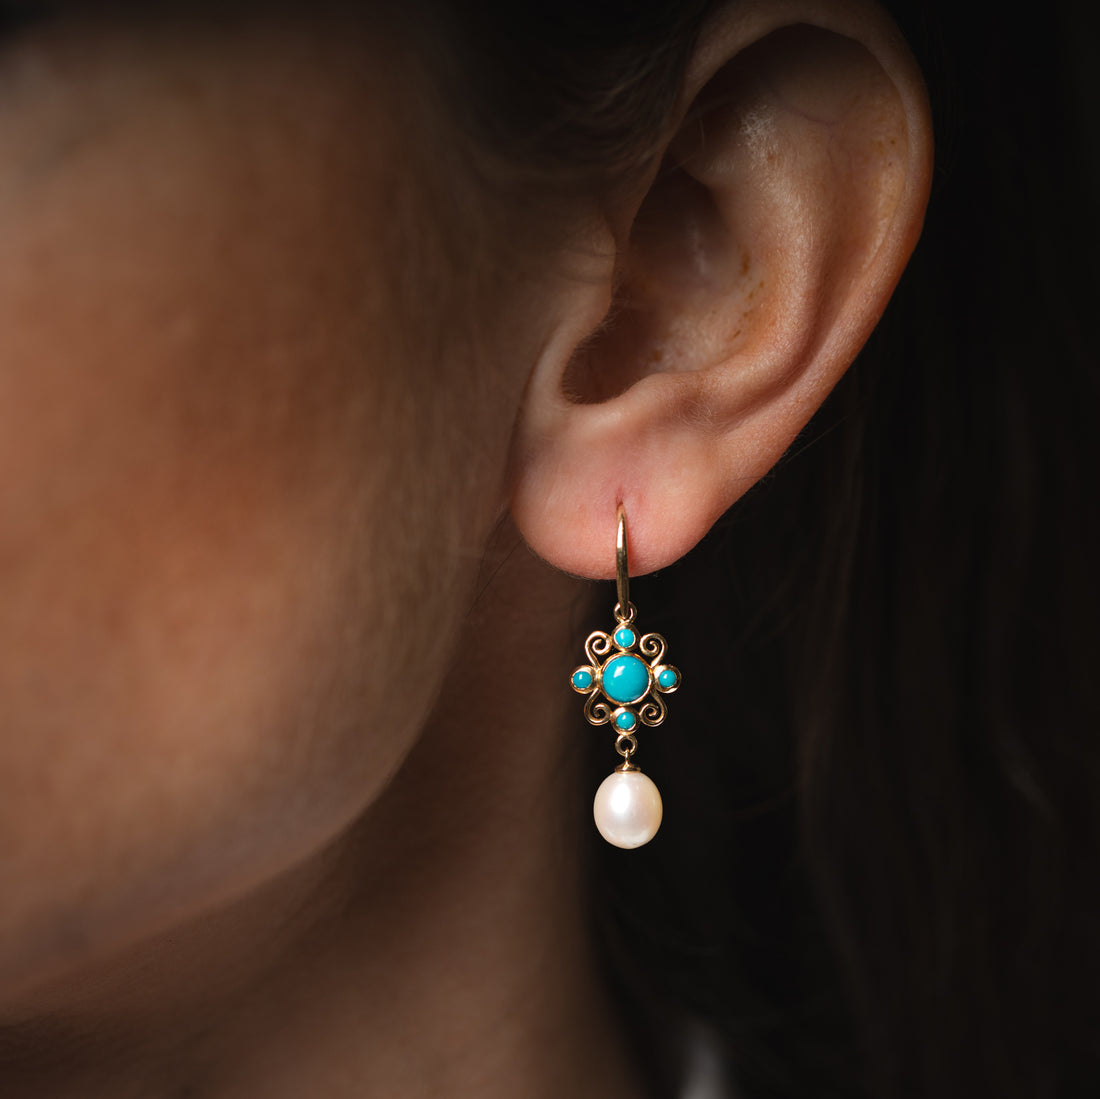 9ct Gold Turquoise and Pearl Drop Earrings - Robert Anthony Jewellers, Edinburgh